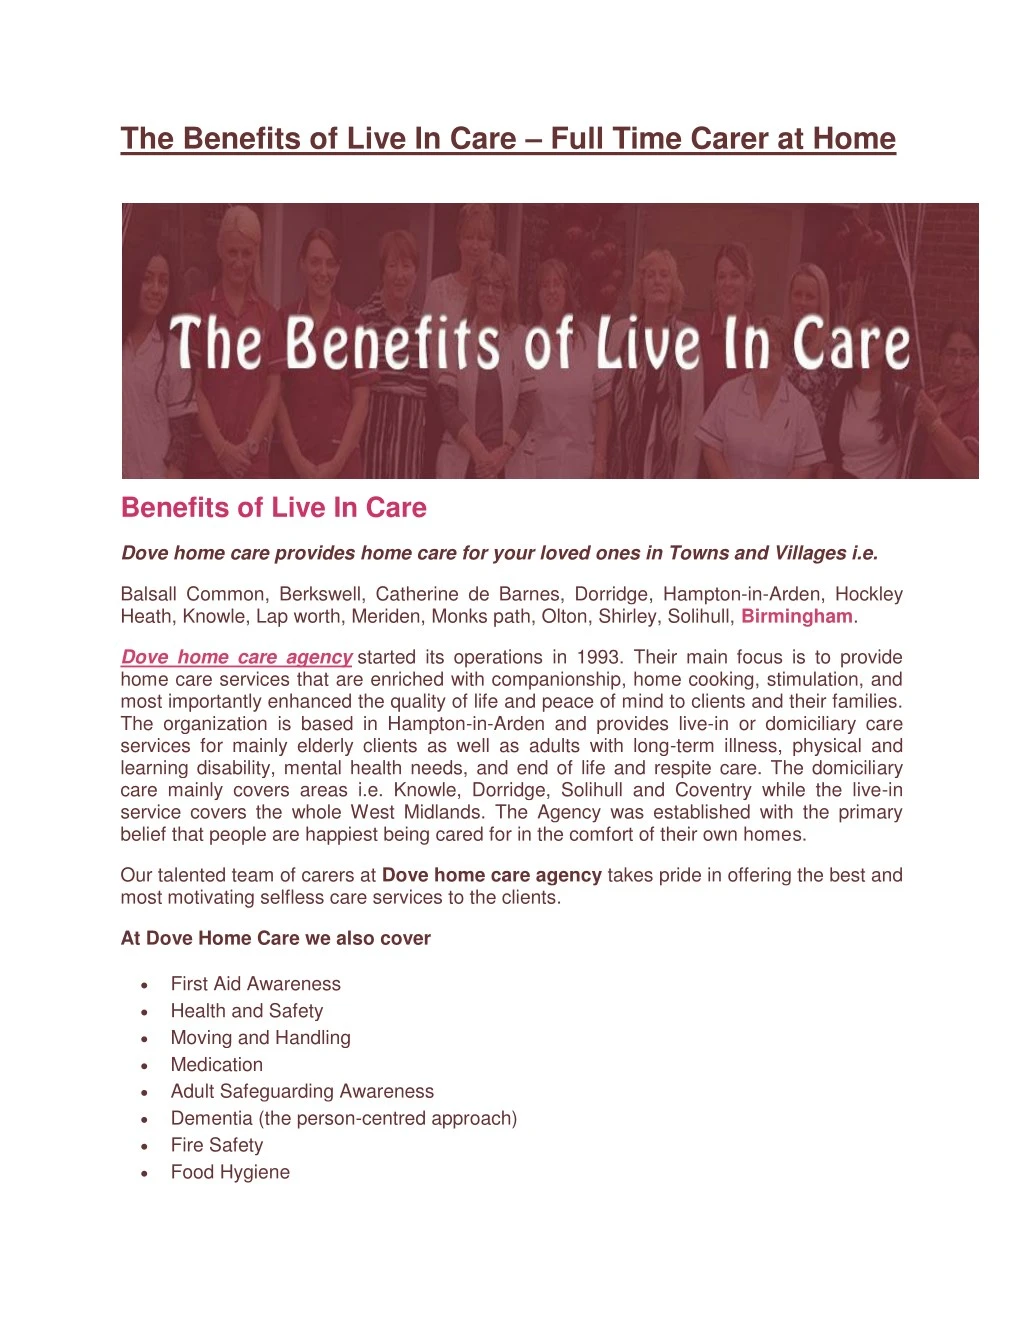 the benefits of live in care full time carer